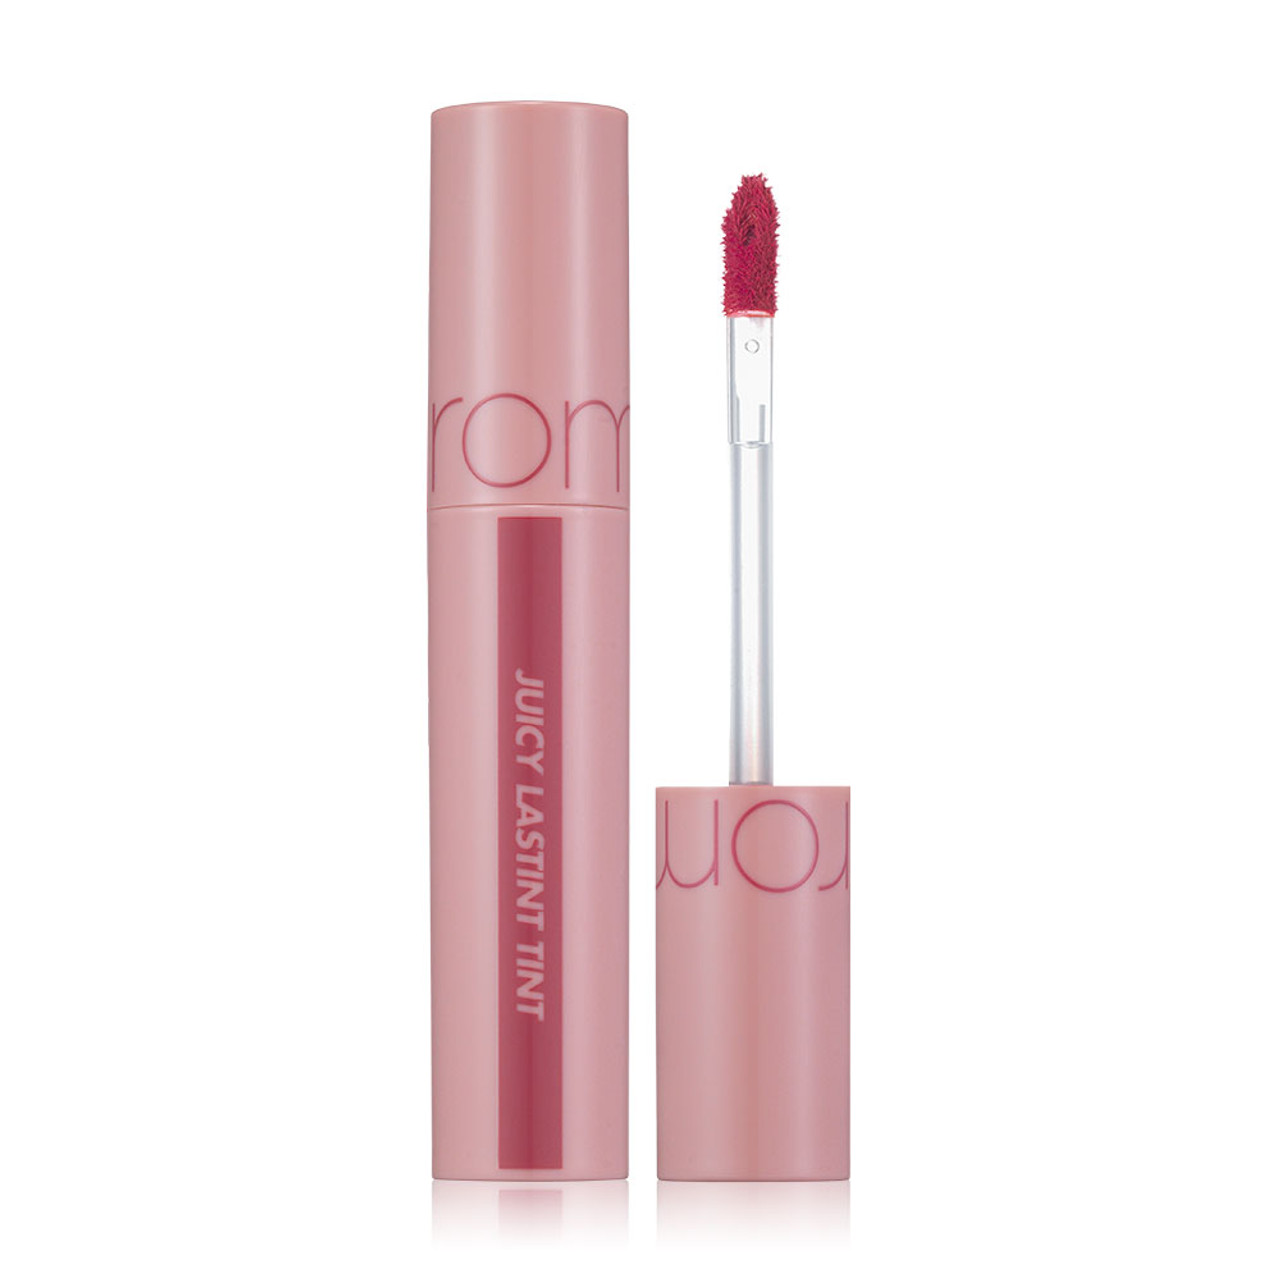 Rom&nd Juicy Lip Tint: Long-Lasting Colour With a Glossy Finish